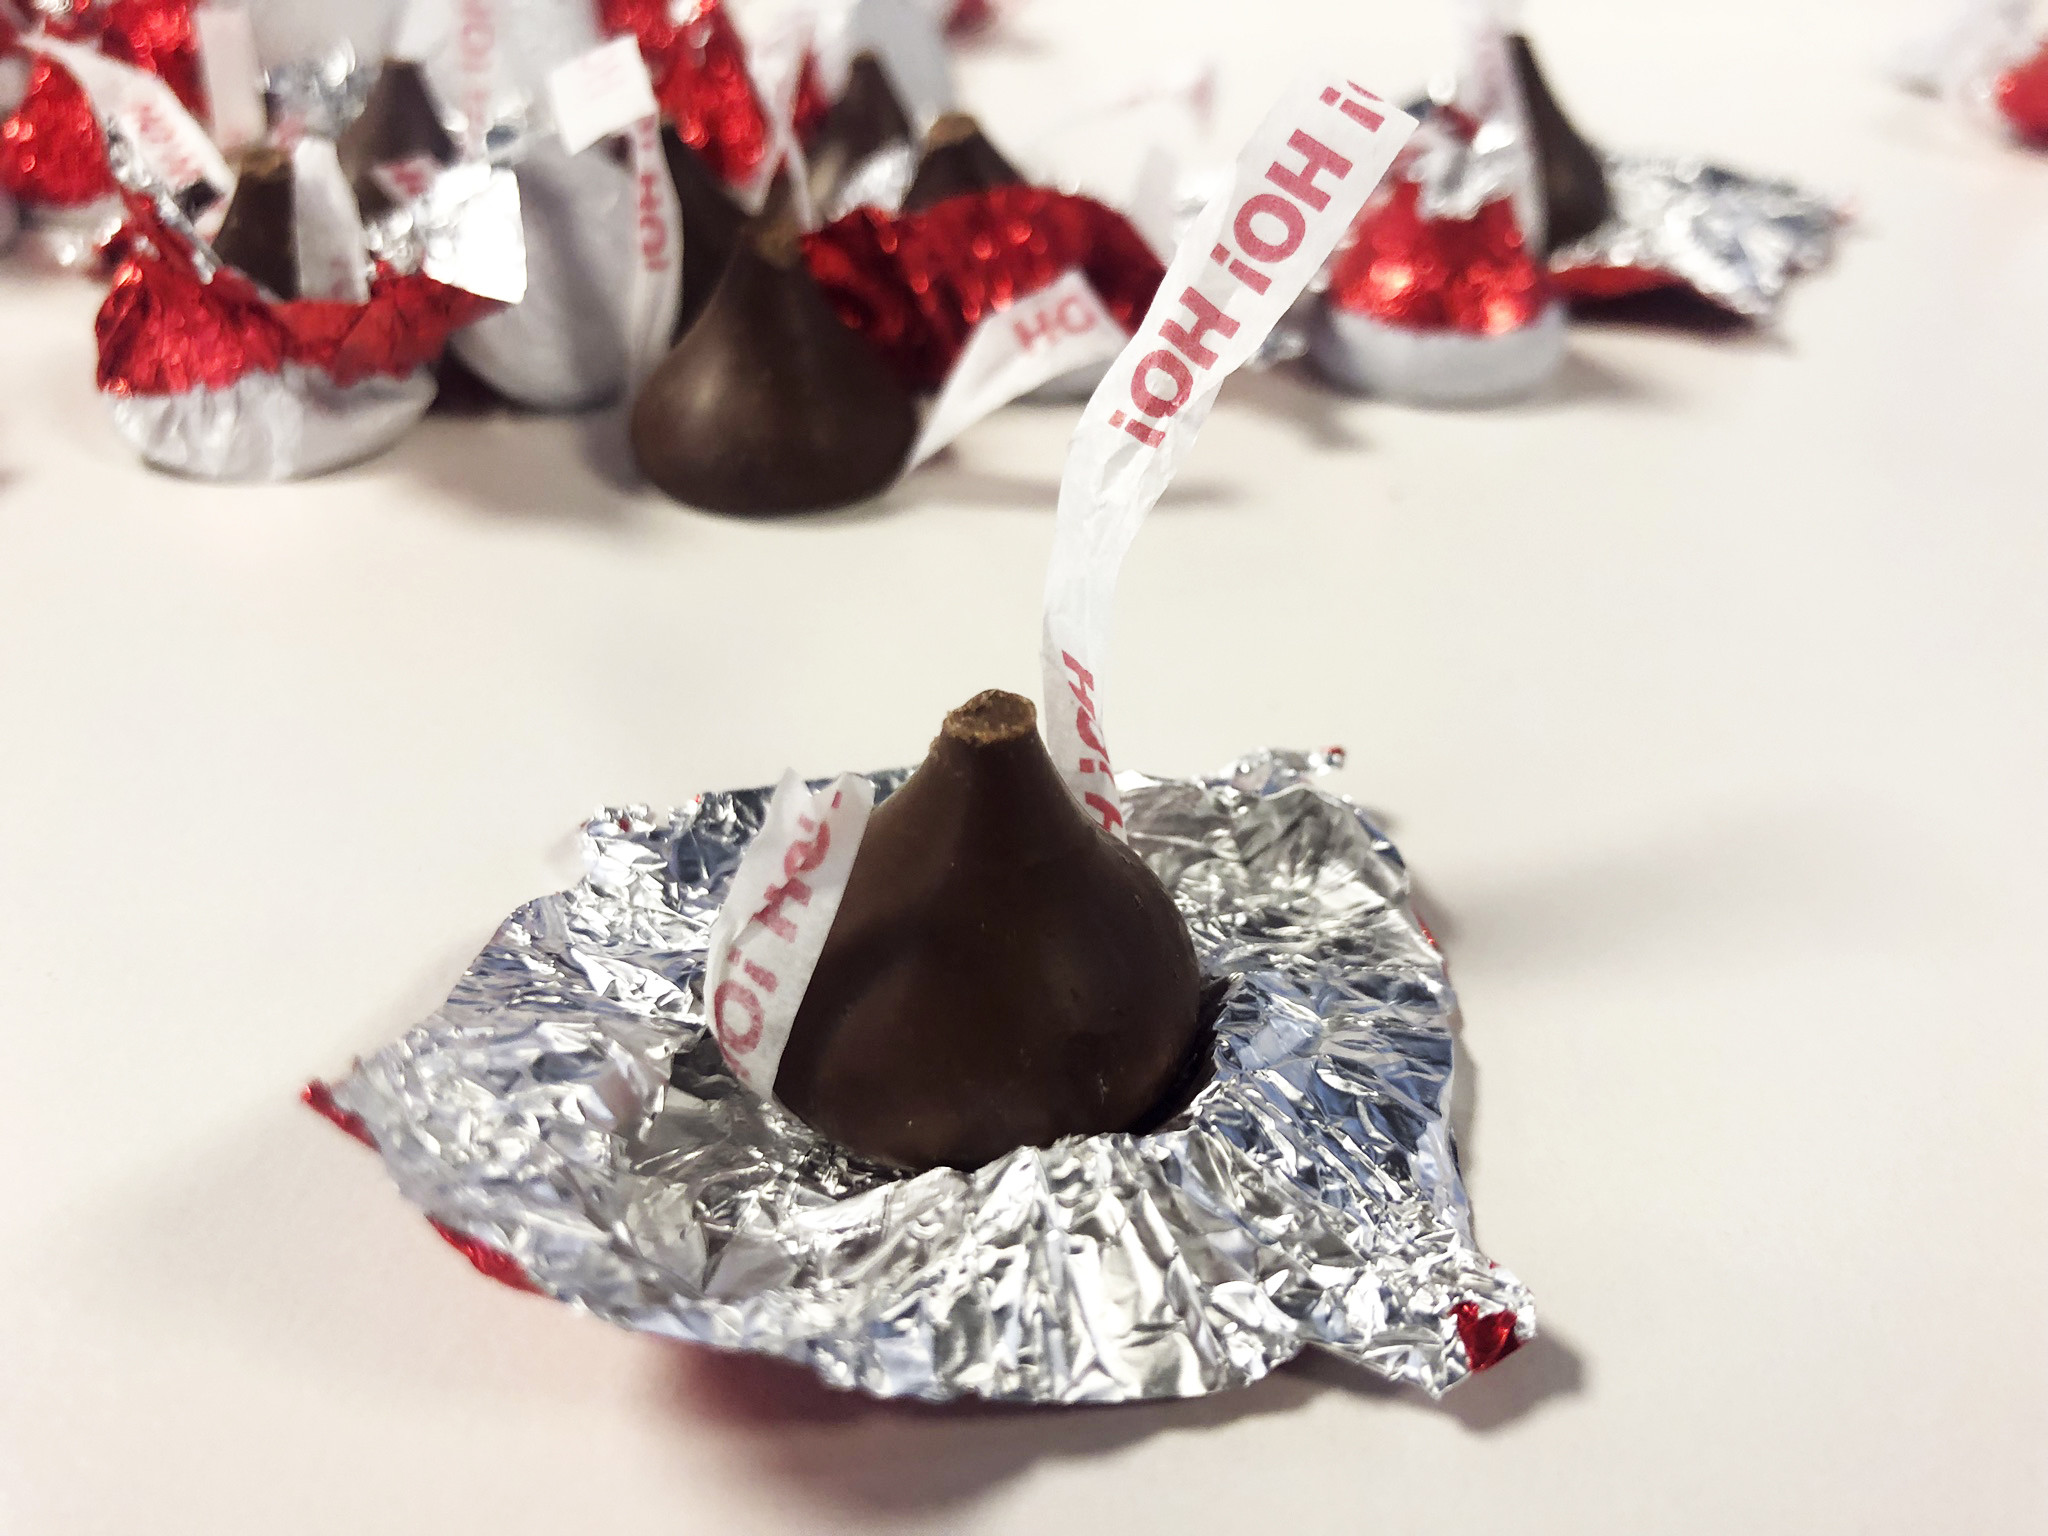 2048x1536 People Are Complaining That Hershey's Kisses Have Broken Tips—and the  Company Has Responded